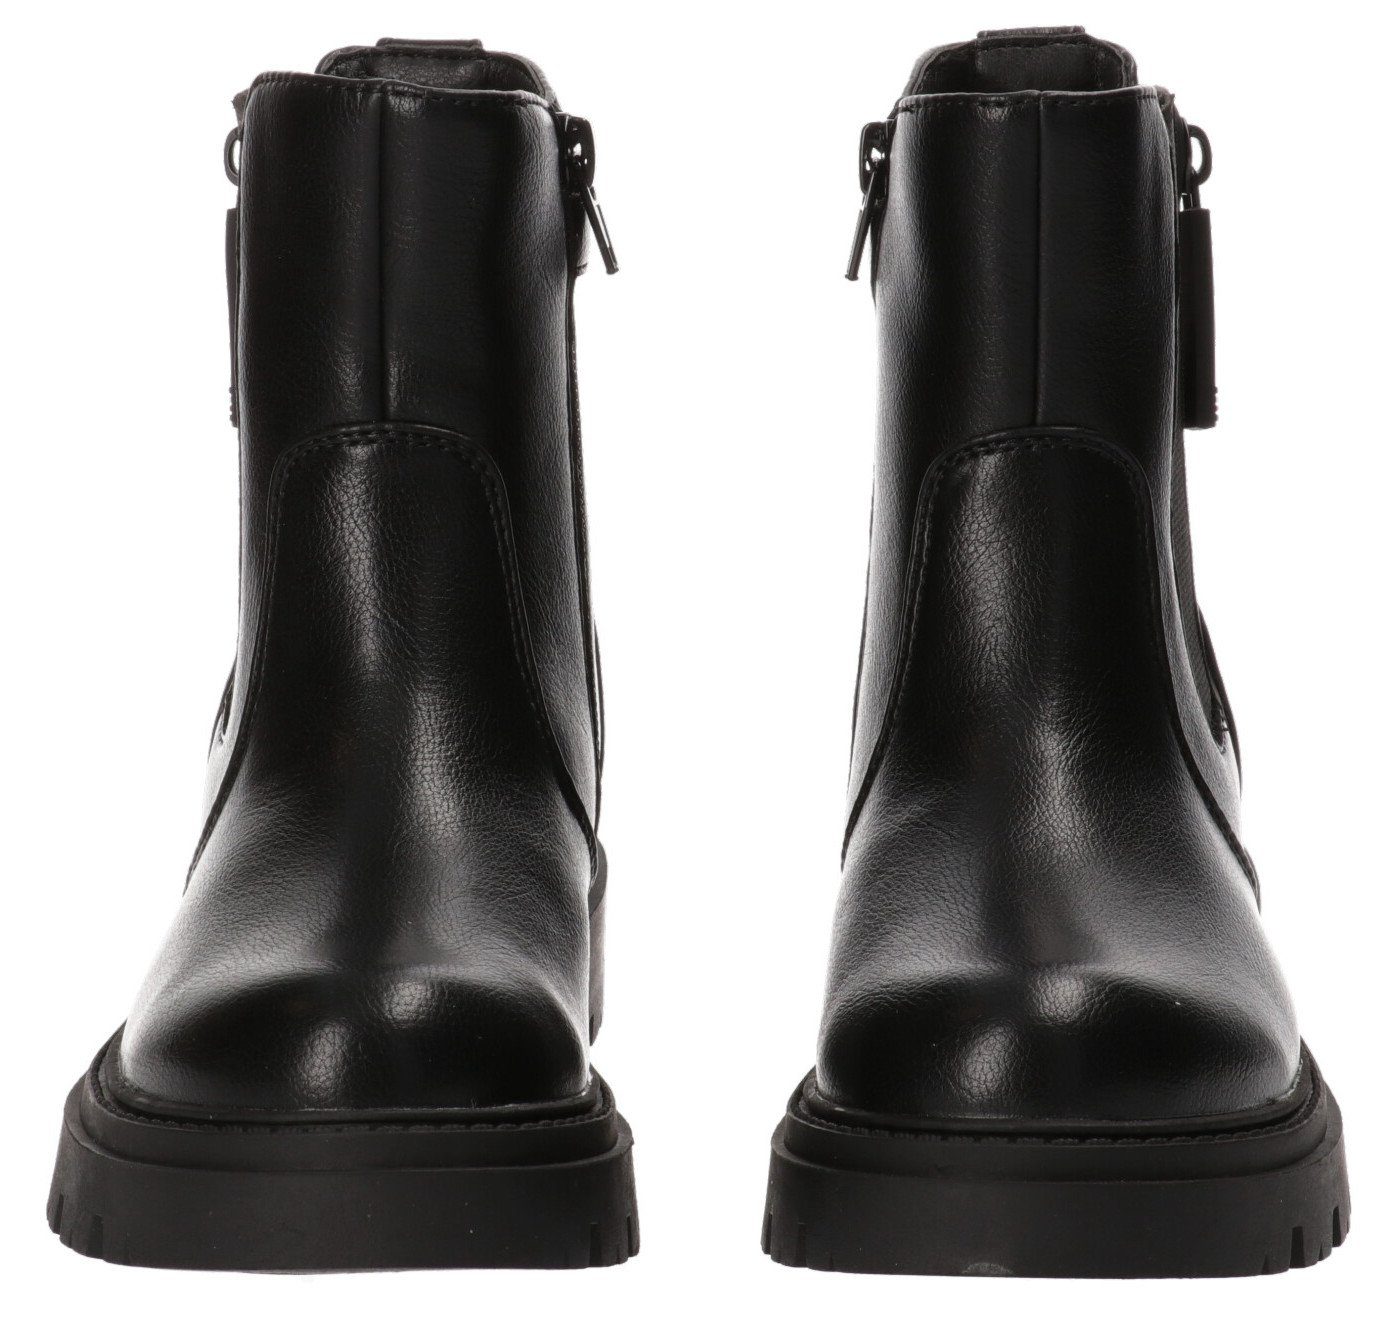 Tommy Hilfiger CHELSEA BOOT Chelseaboots modischer Plateausohle mit